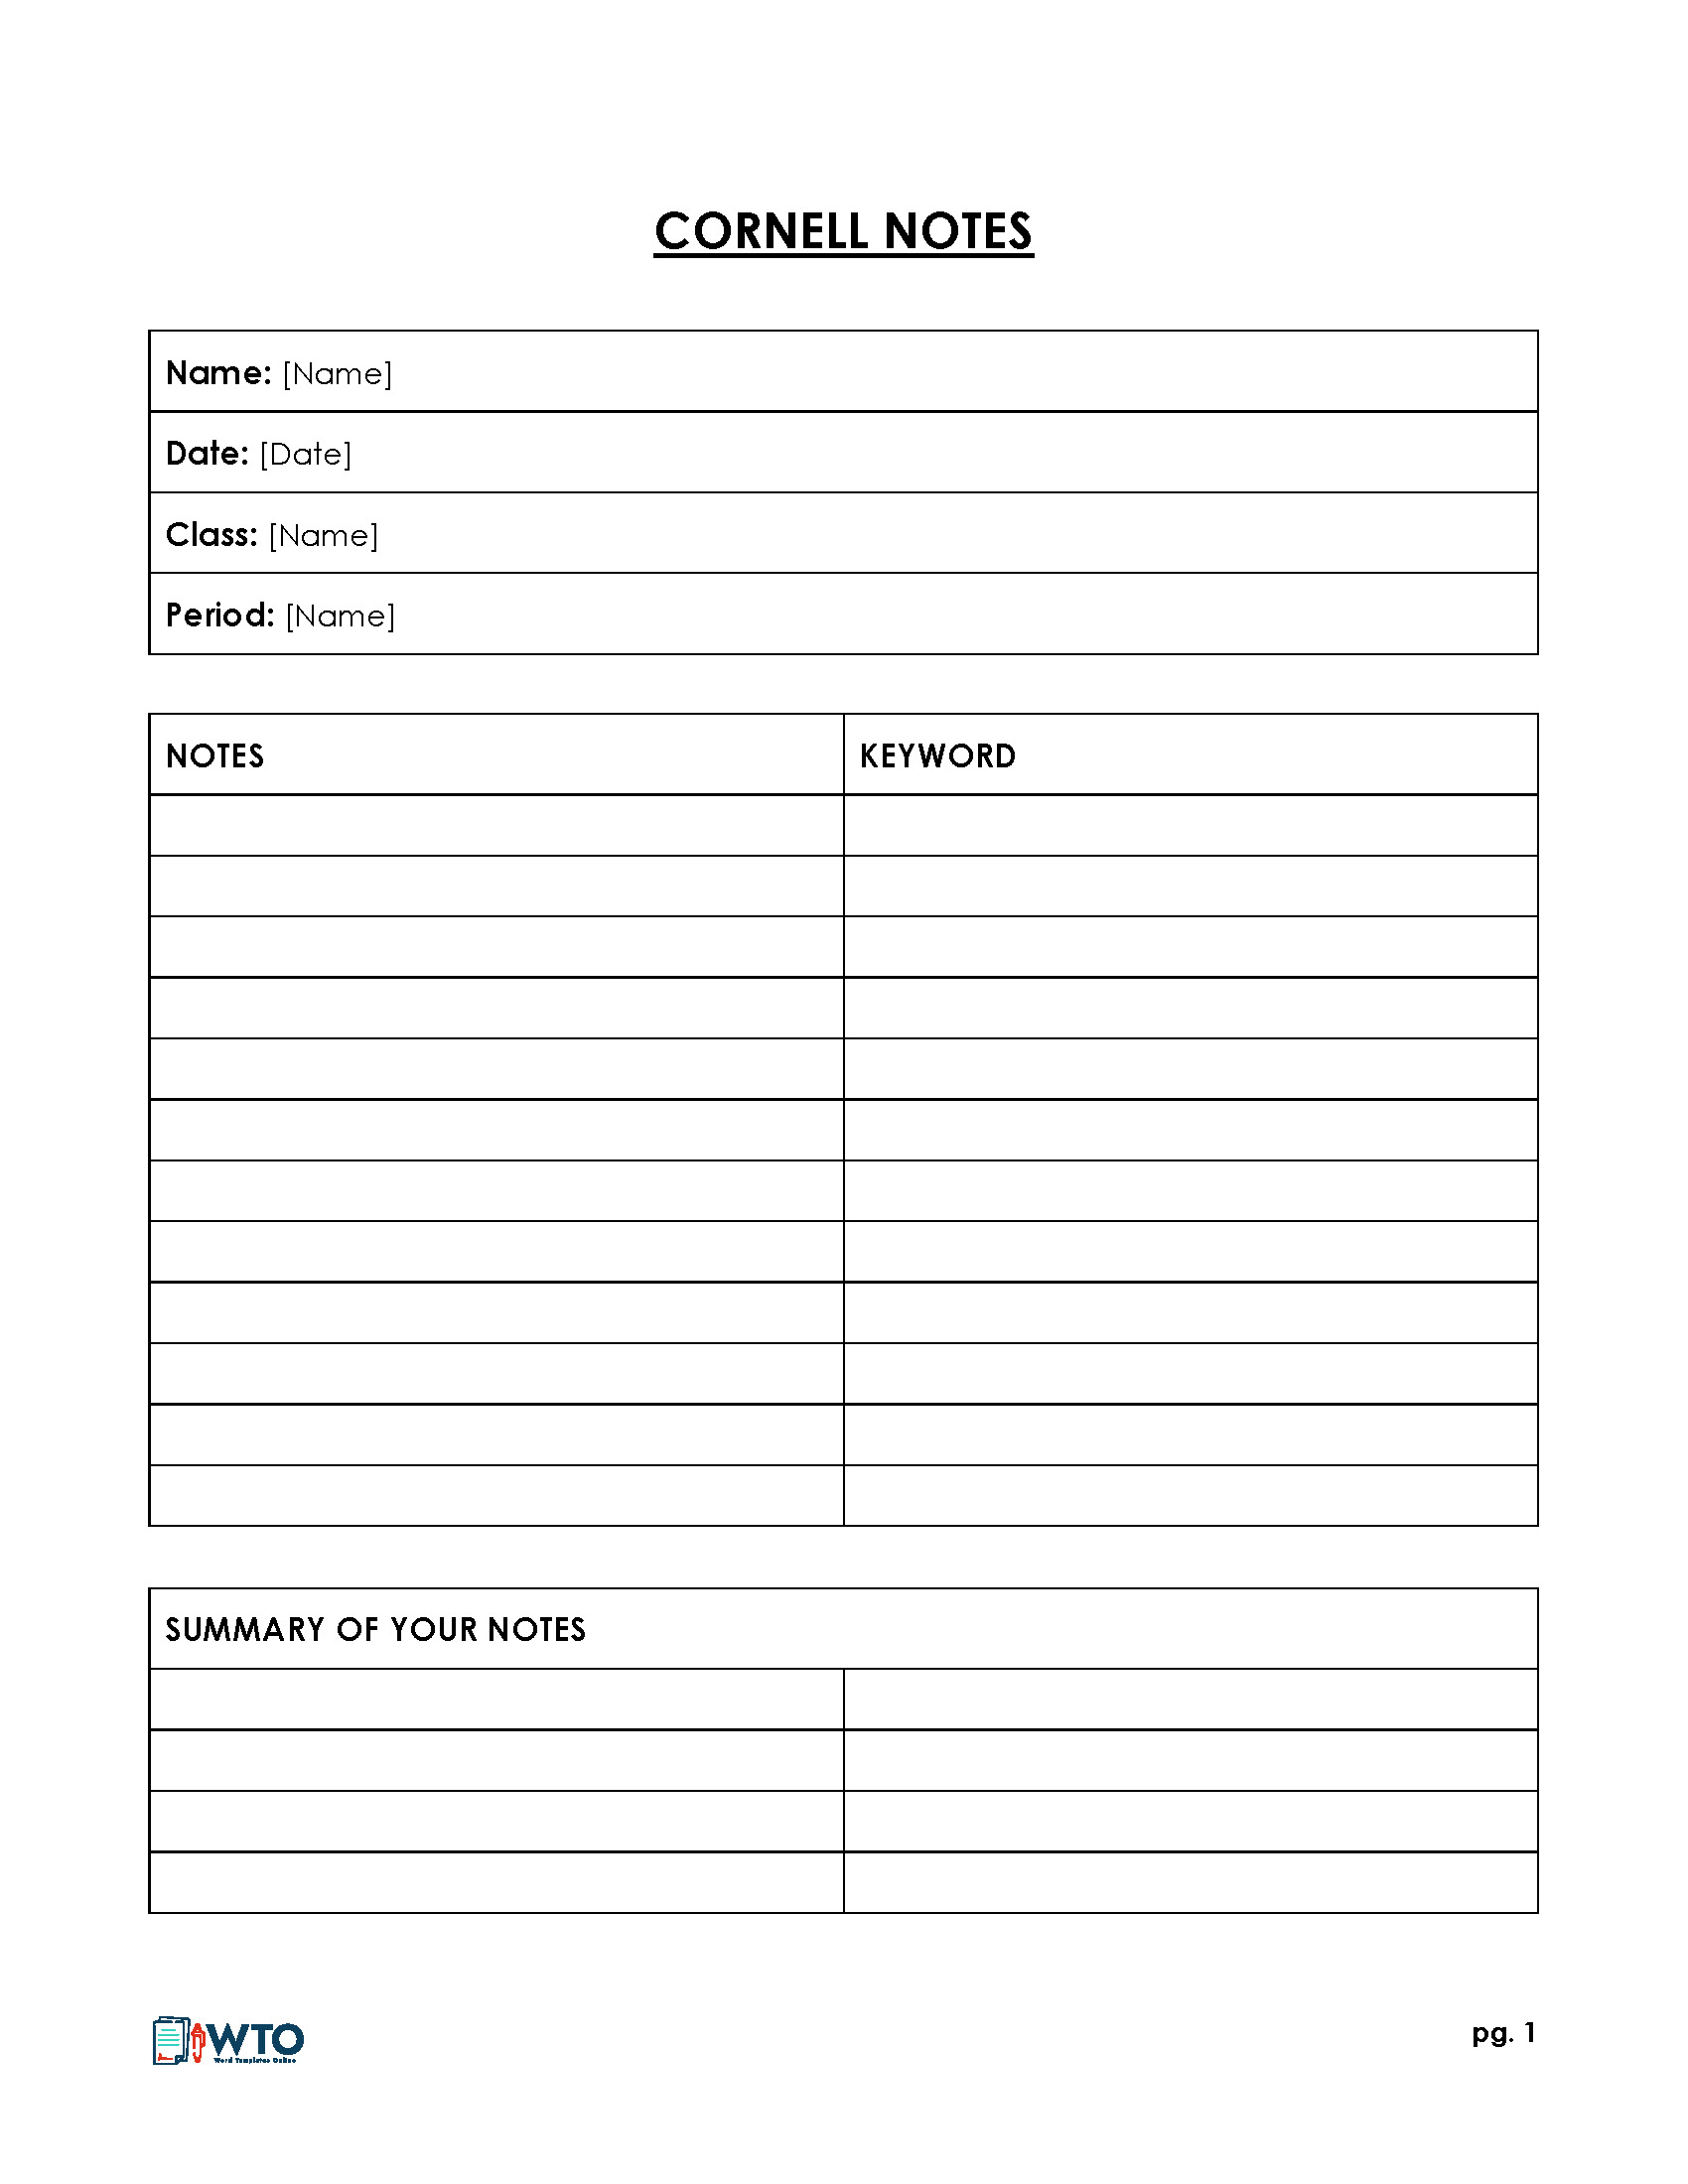 Note Taking Templates Free Downloads 9+ Cornell Note Taking Templates